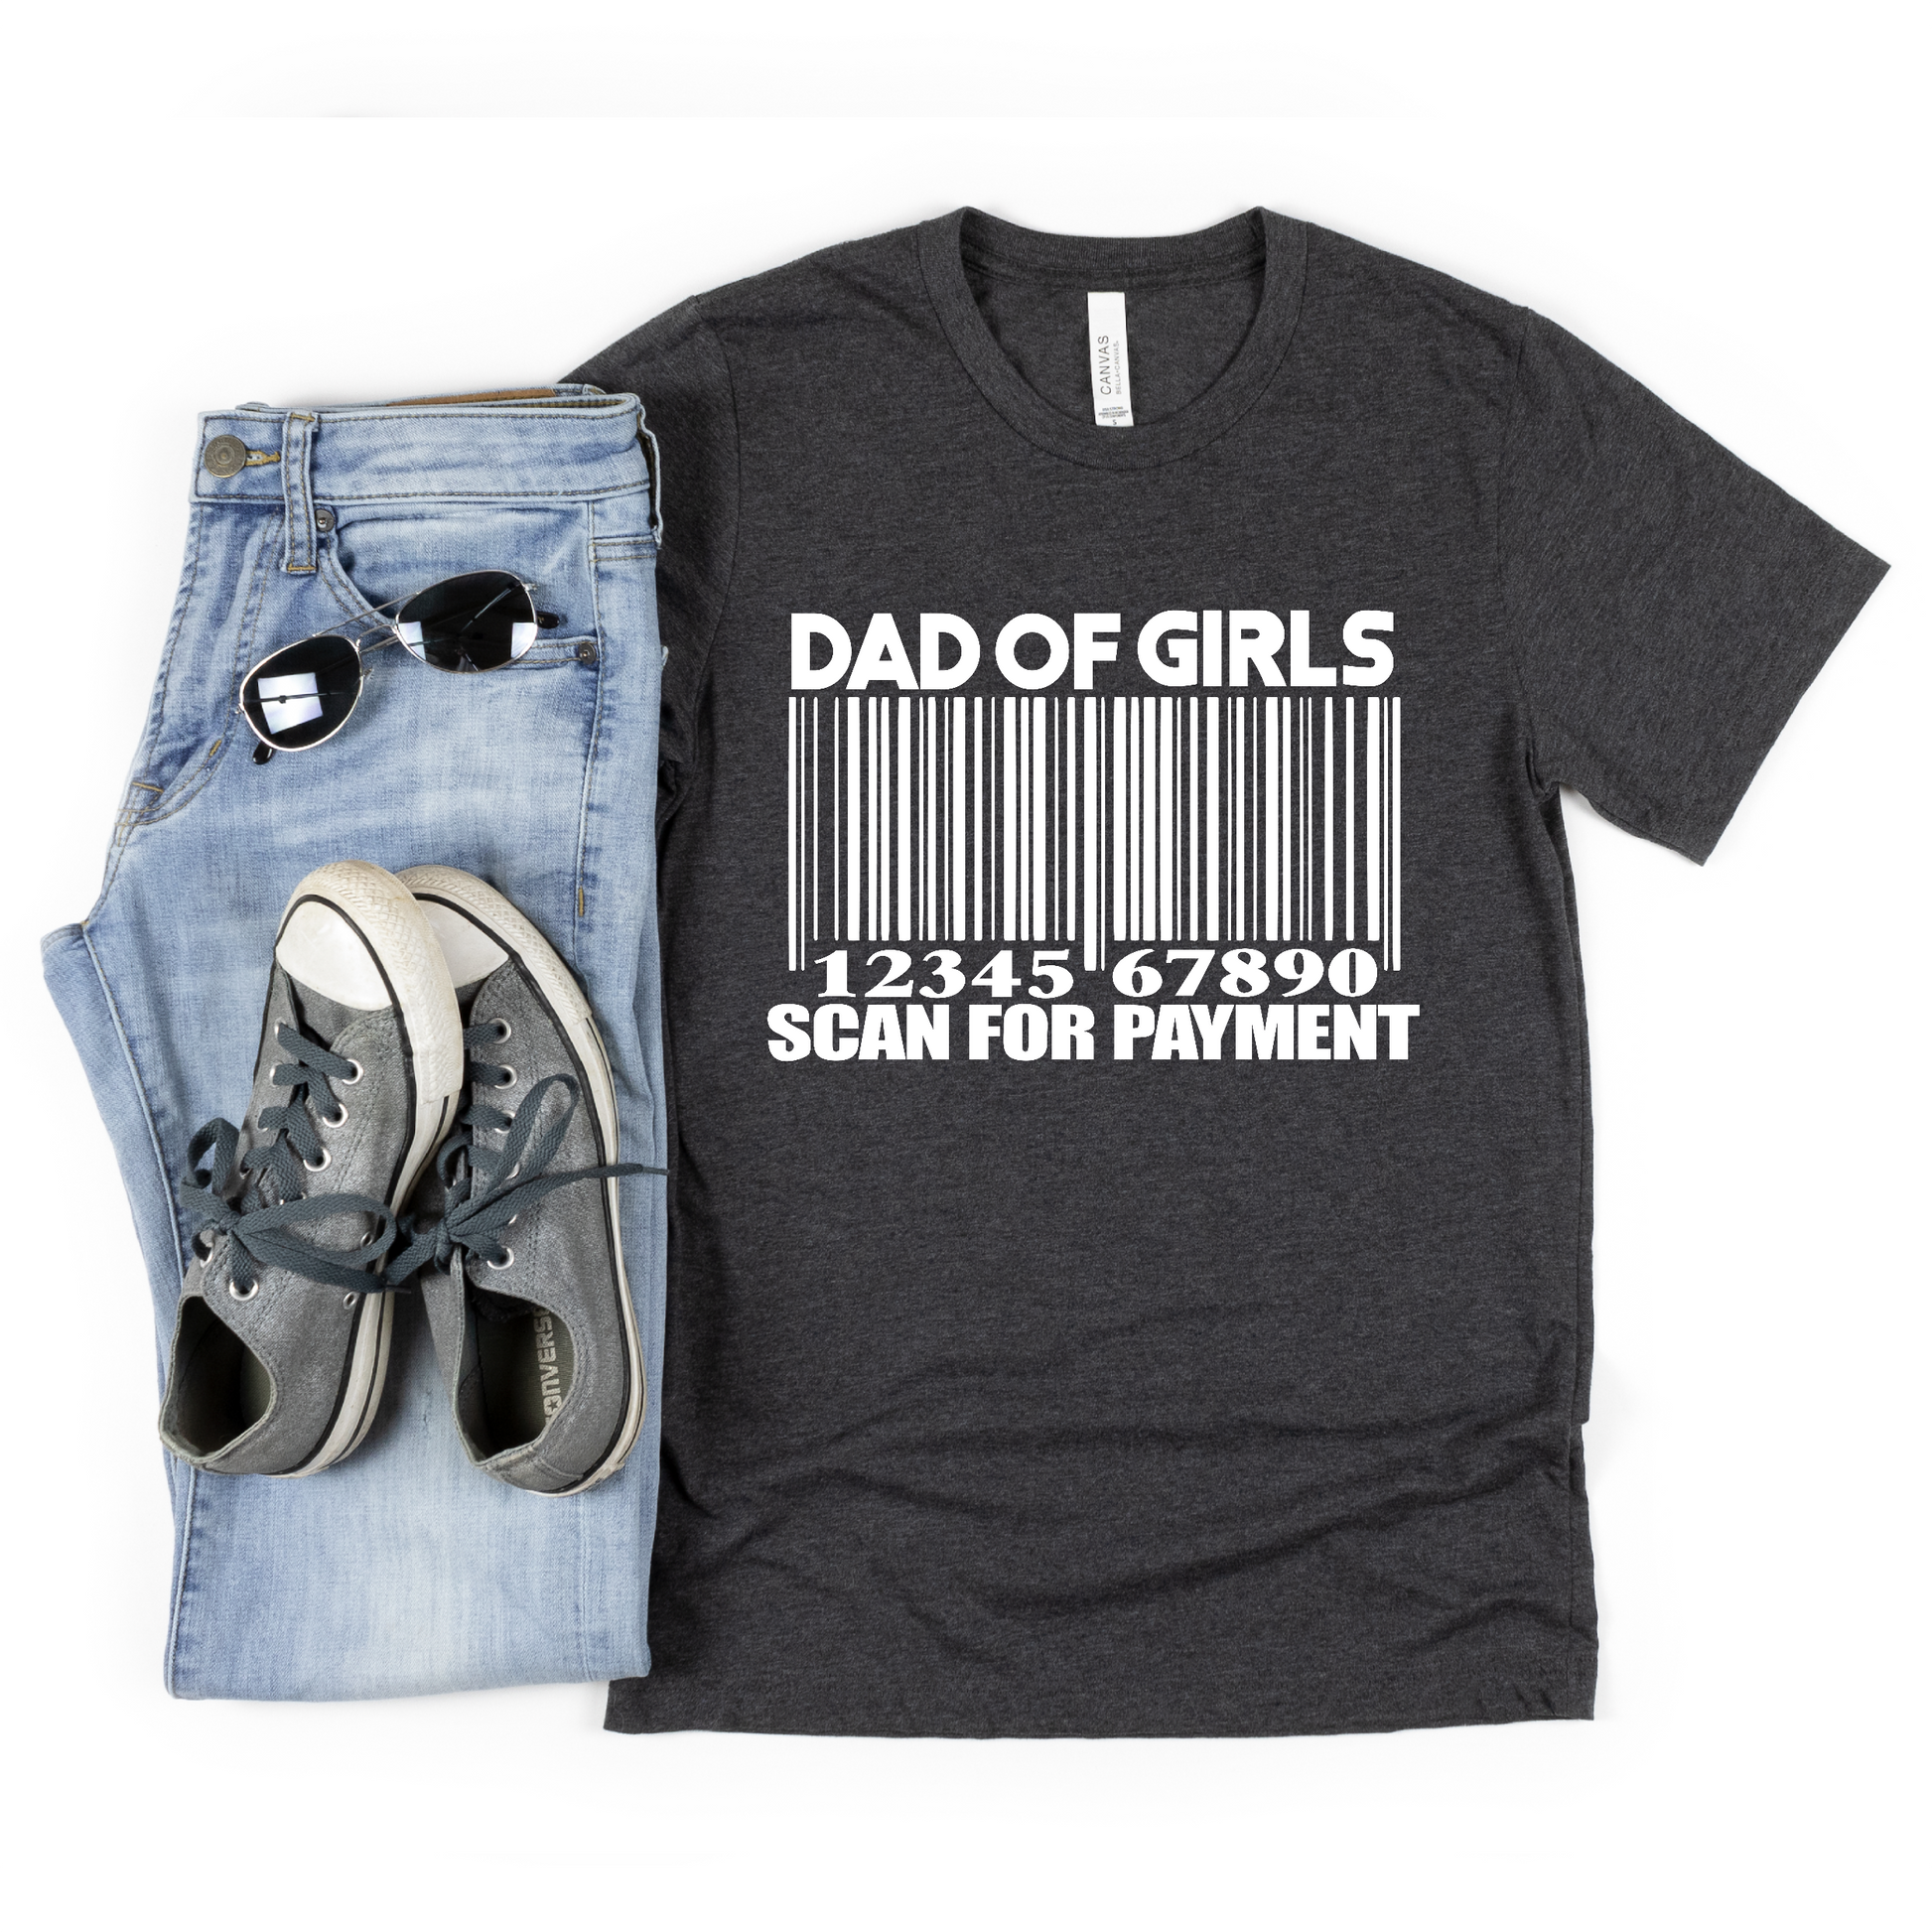 Dad of Girls Scan for Payment T-Shirt, Fathers Day Shirt, Funny Fathers Day  Shirt, Girl Dad T-Shirt